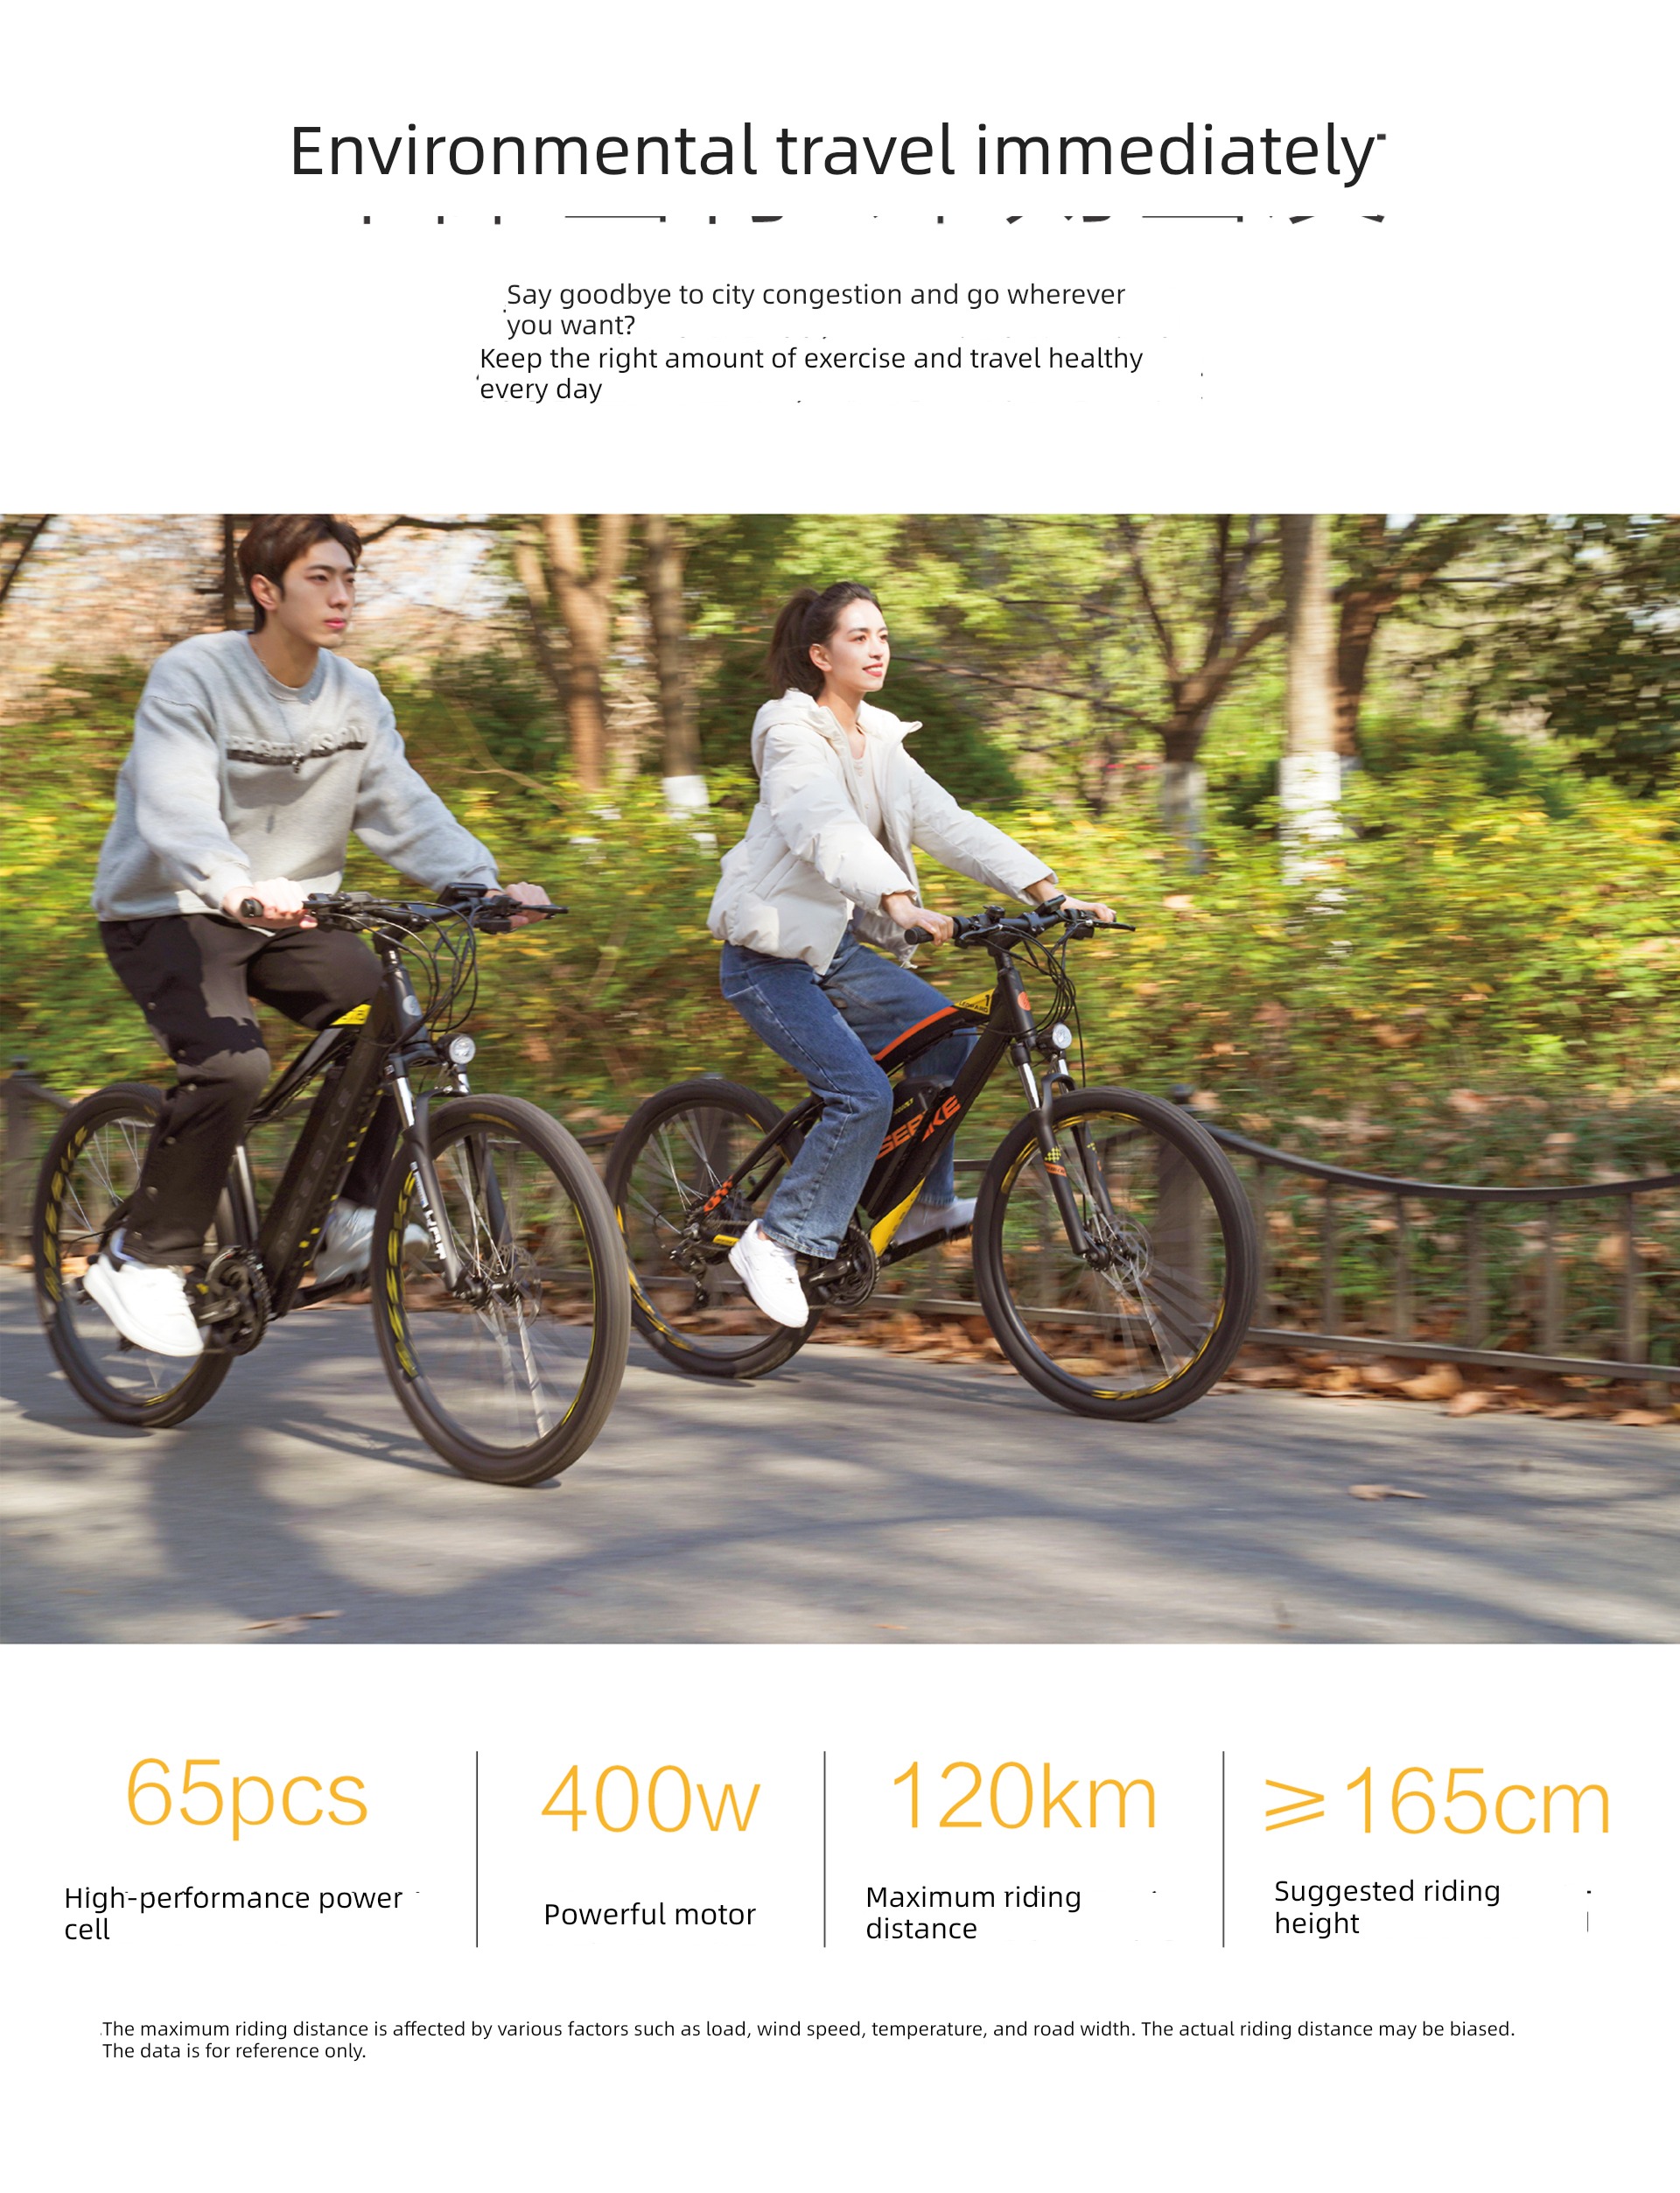 mse bike Electric Help commute whole country Bicycle